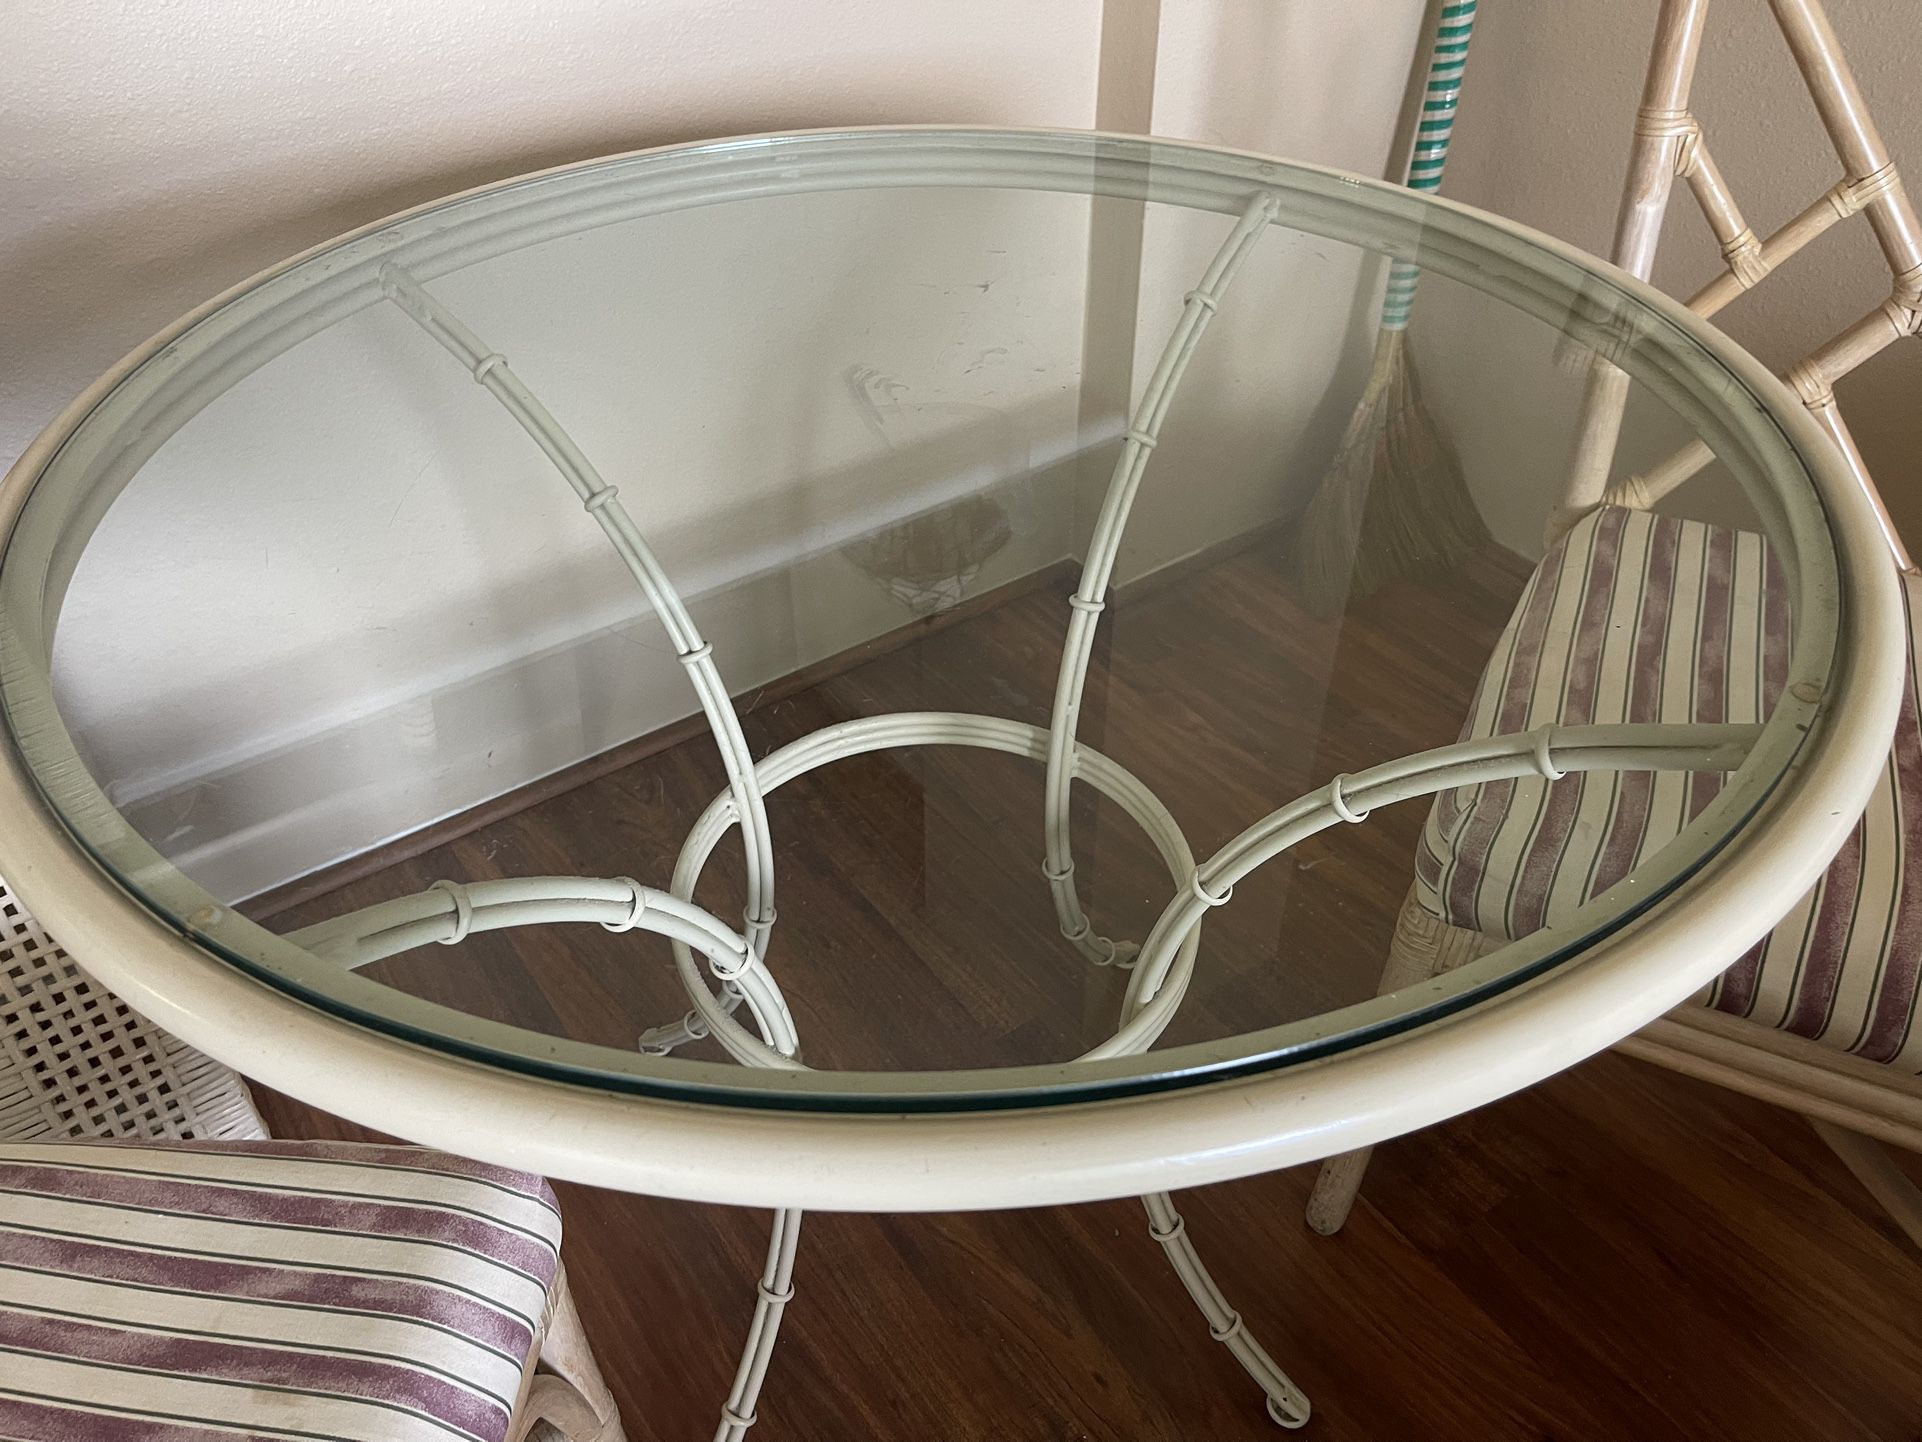 Glass Table Top With Chairs $50